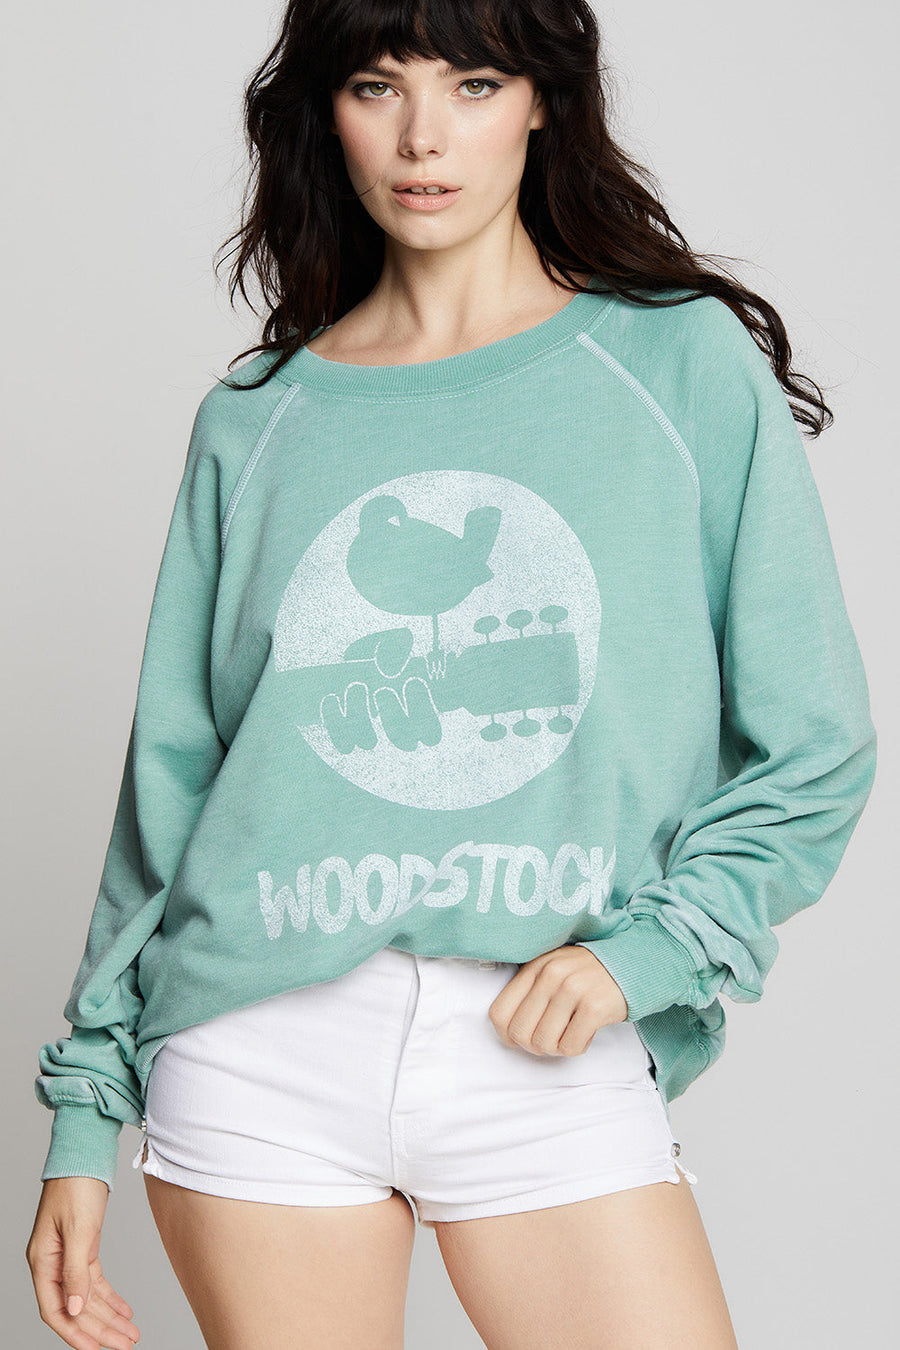 Woodstock Symbol Sweater 301322 Dill-Weed